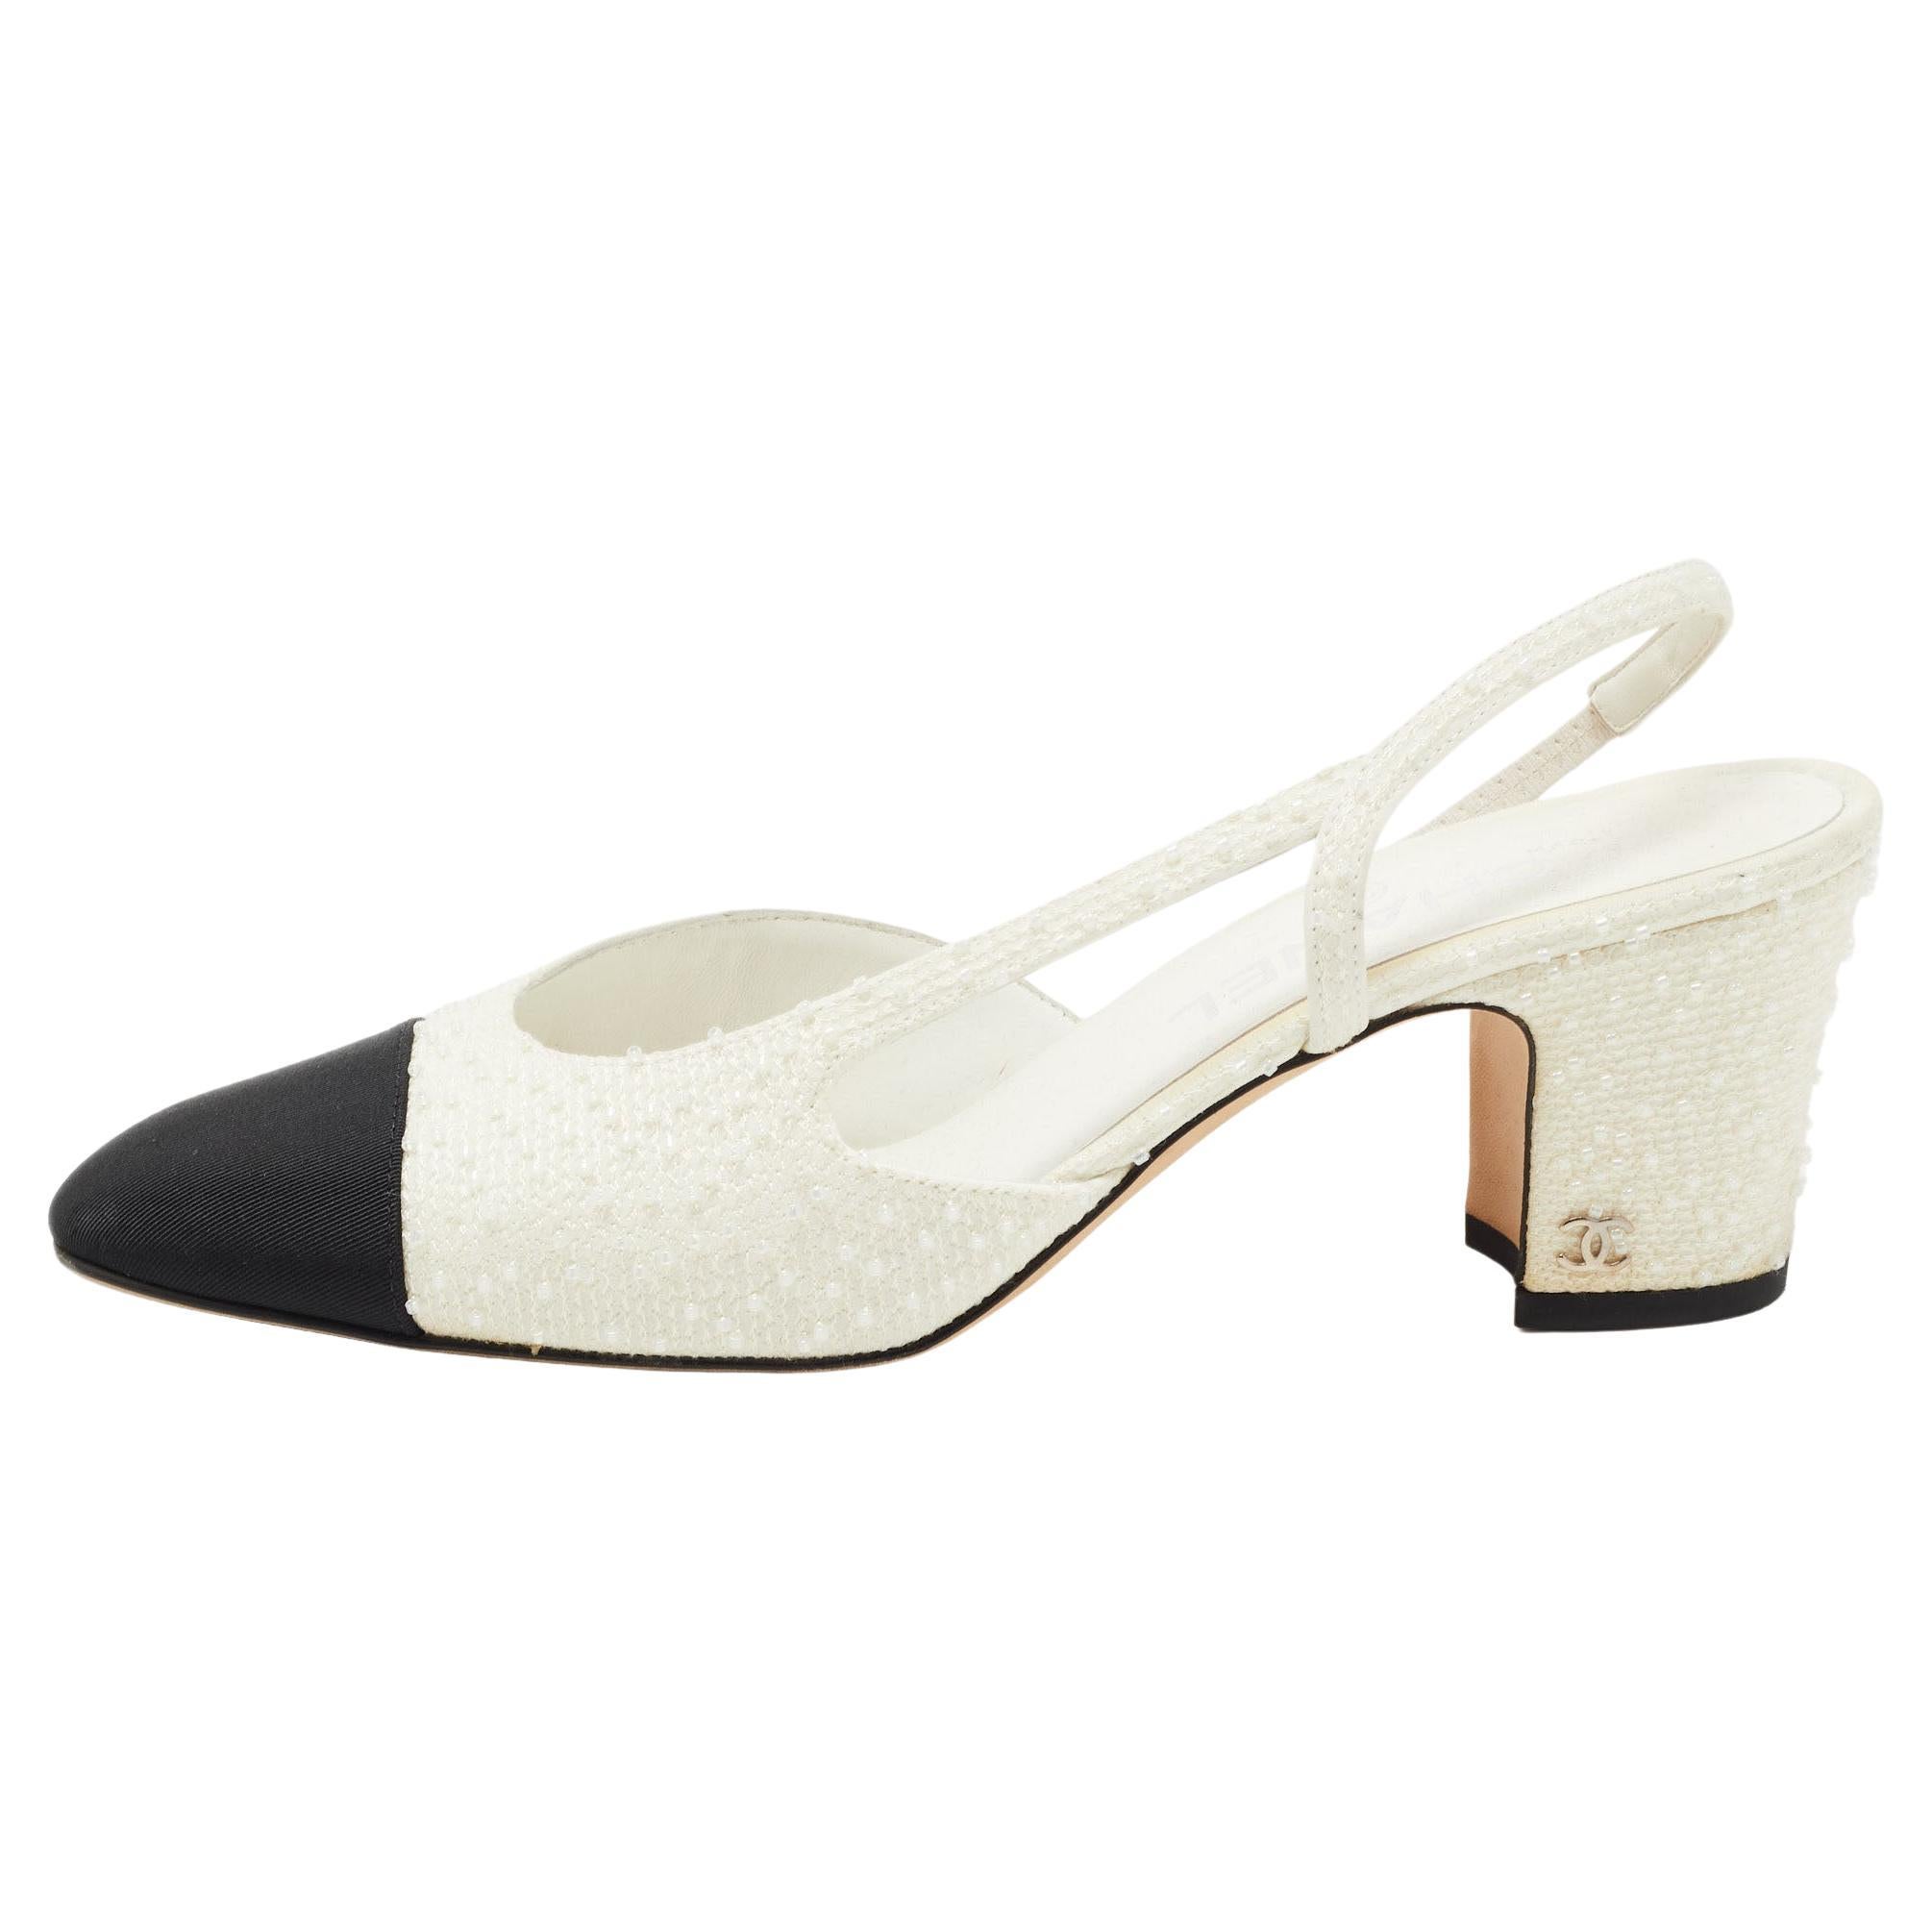 Chanel White/Black Canvas and Tweed CC Slingback Block Heel Pumps Size 38.5